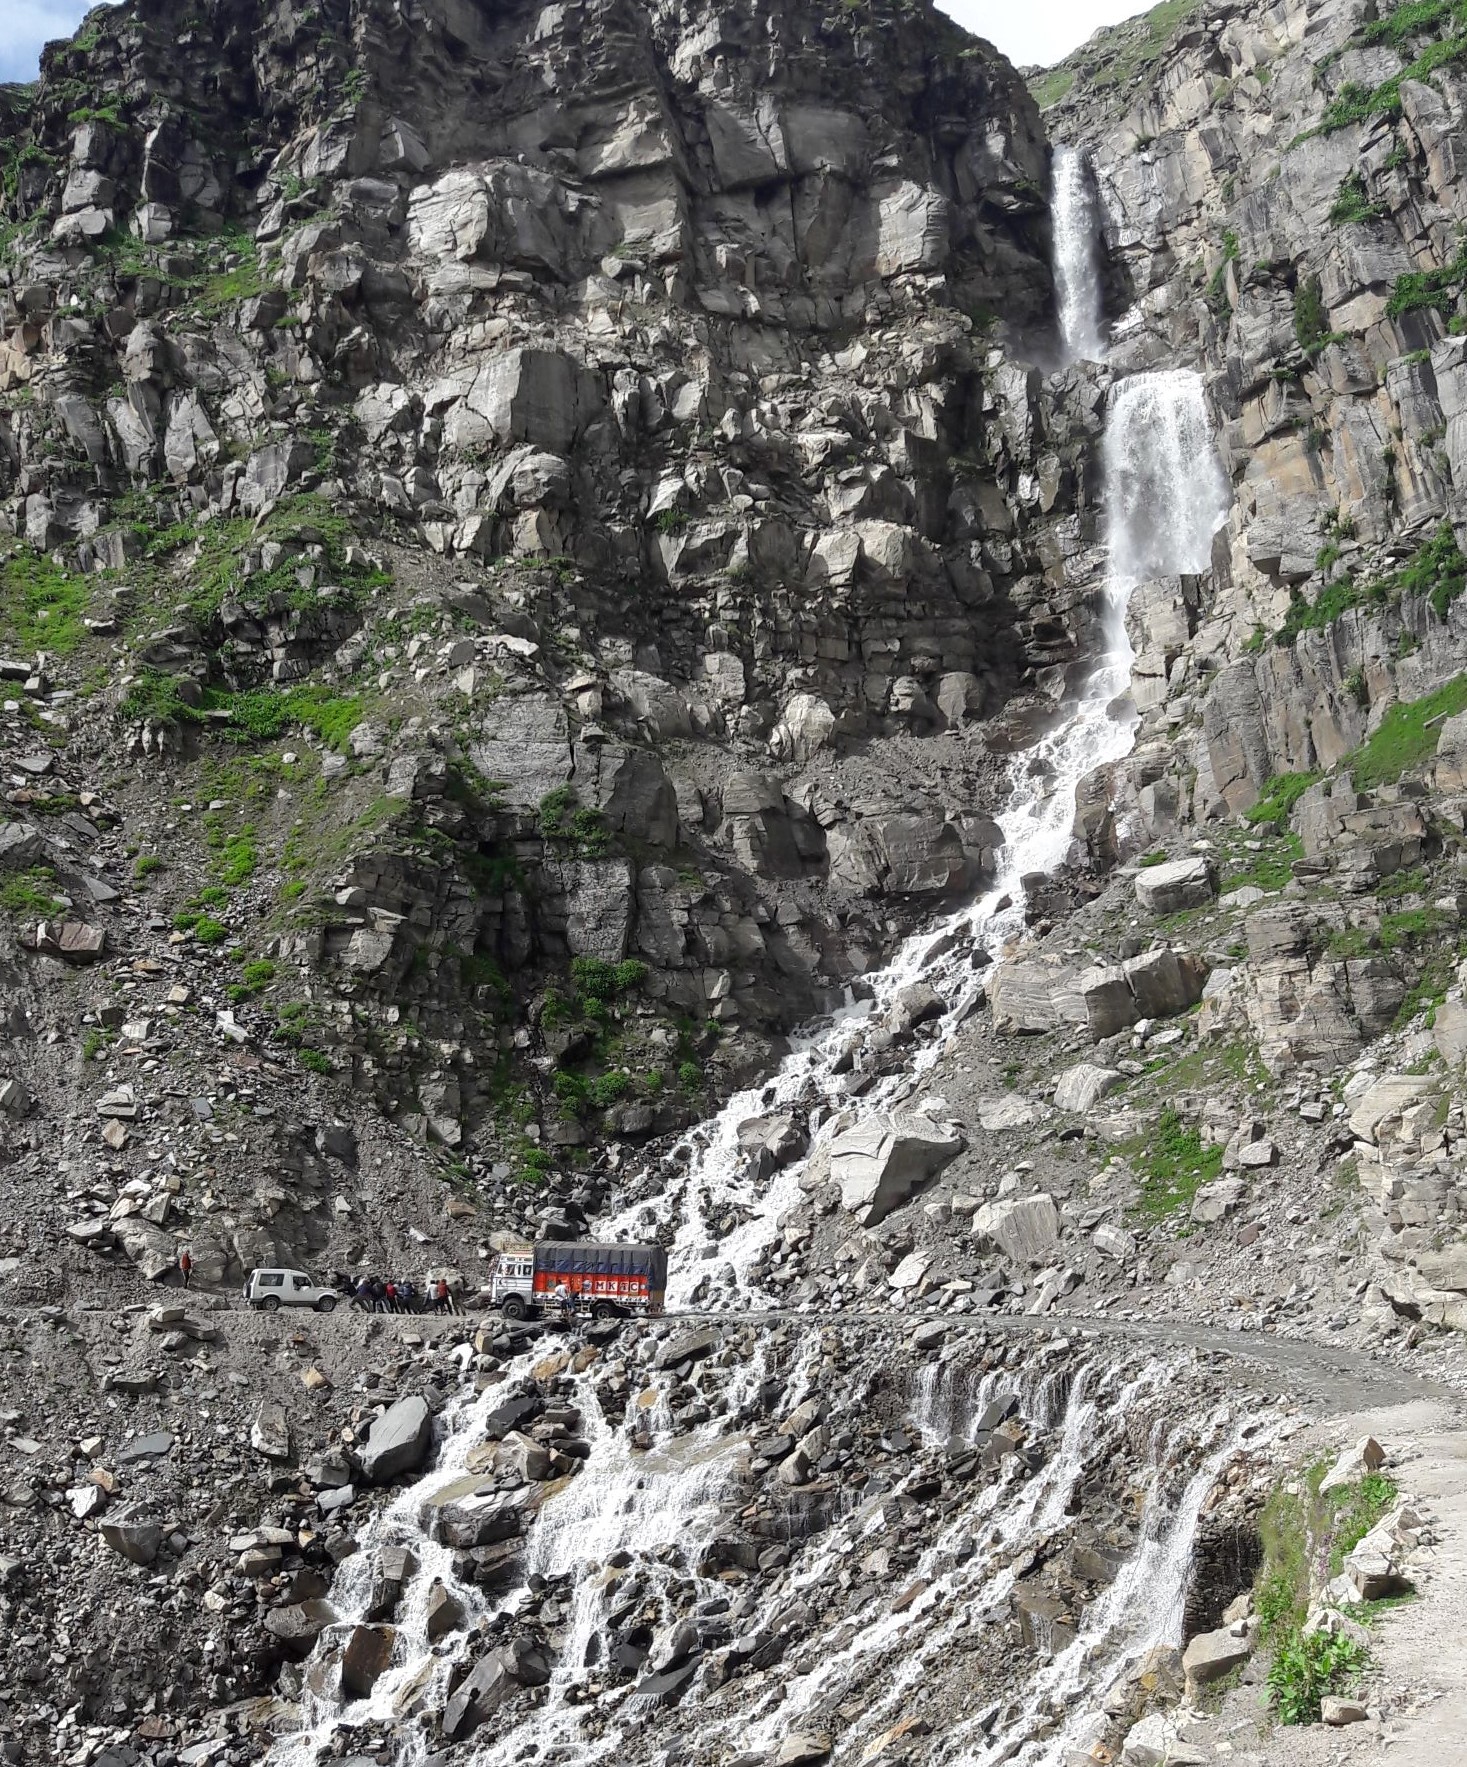 Caught in a Rapid! As we were making our way to Spiti, we came across a massive rapid mid-mountain where a heavily laden got stuck. The passage was so narrow that only one vehicle could pass at at time.